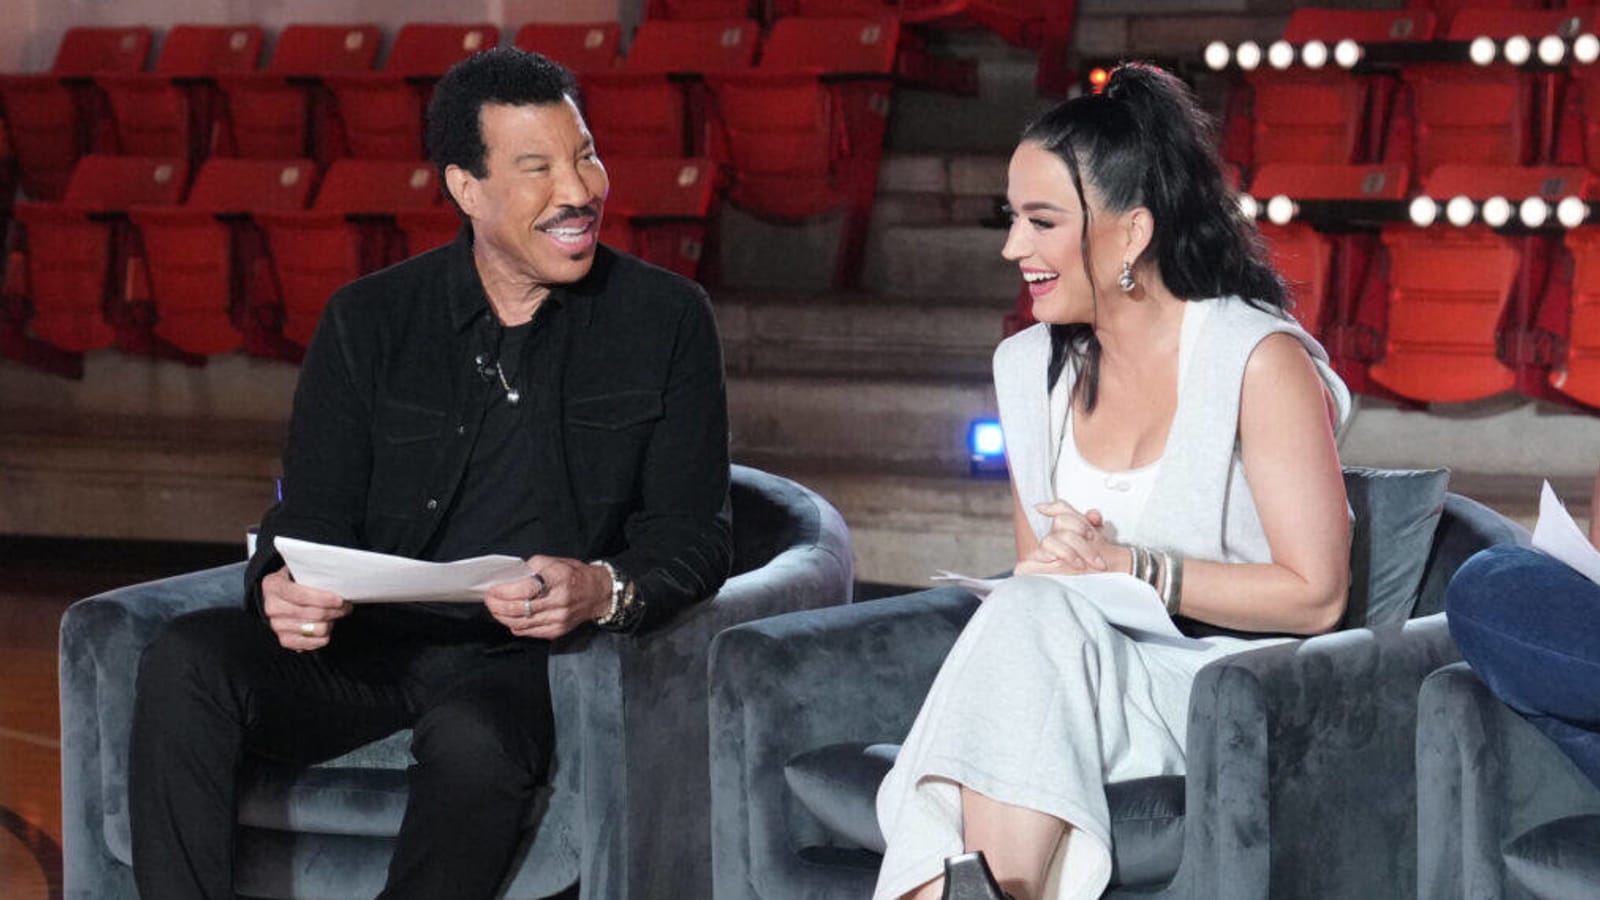 Lionel Richie Blindsided by Katy Perry’s ‘American Idol’ Exit Announcement